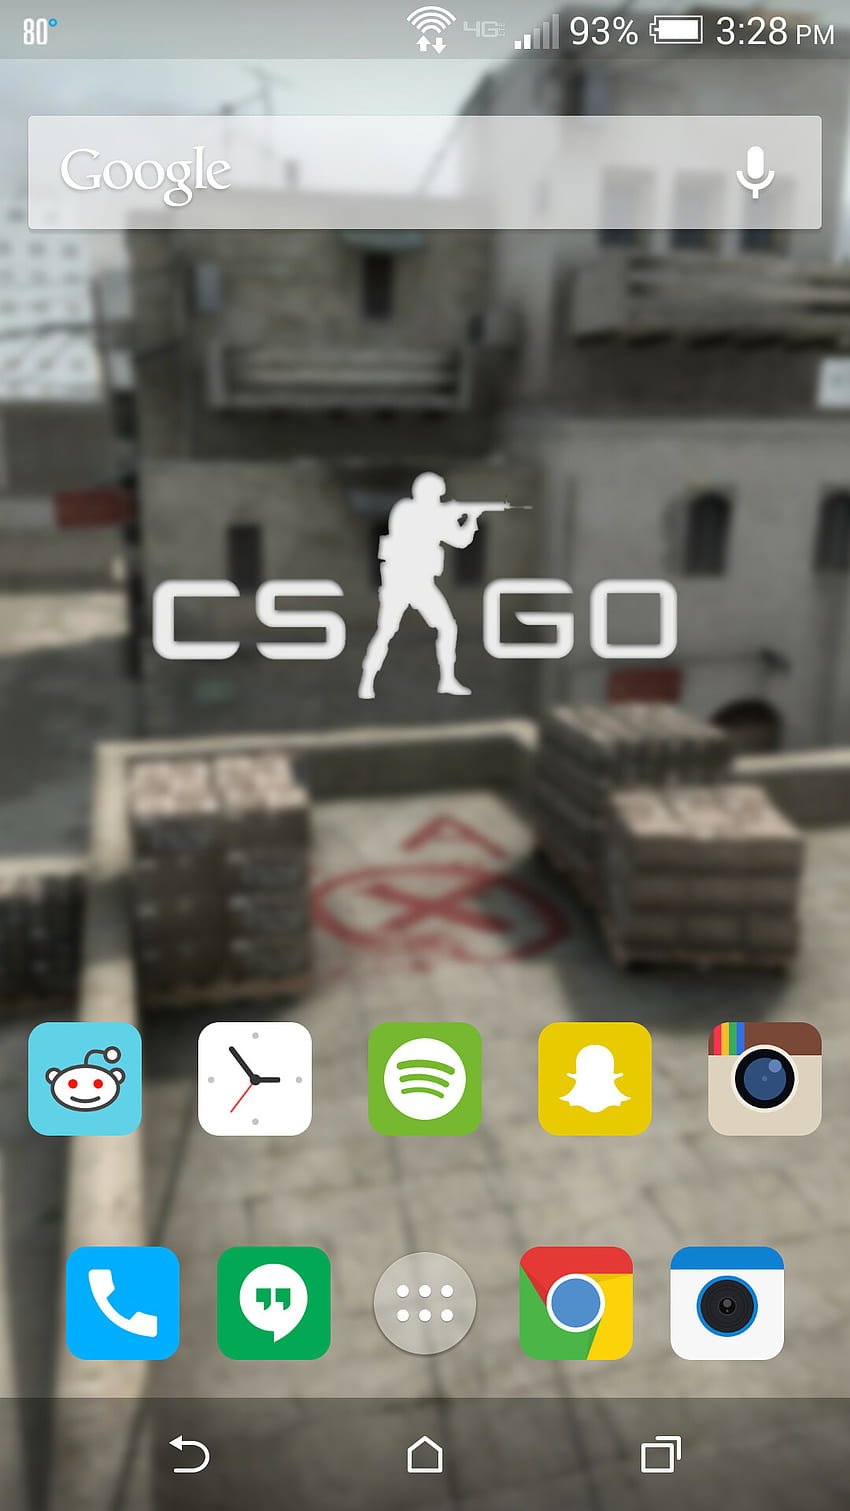 Couldn't find a god CSGO phone so I made one. DL link in comments if you want it. HD phone wallpaper